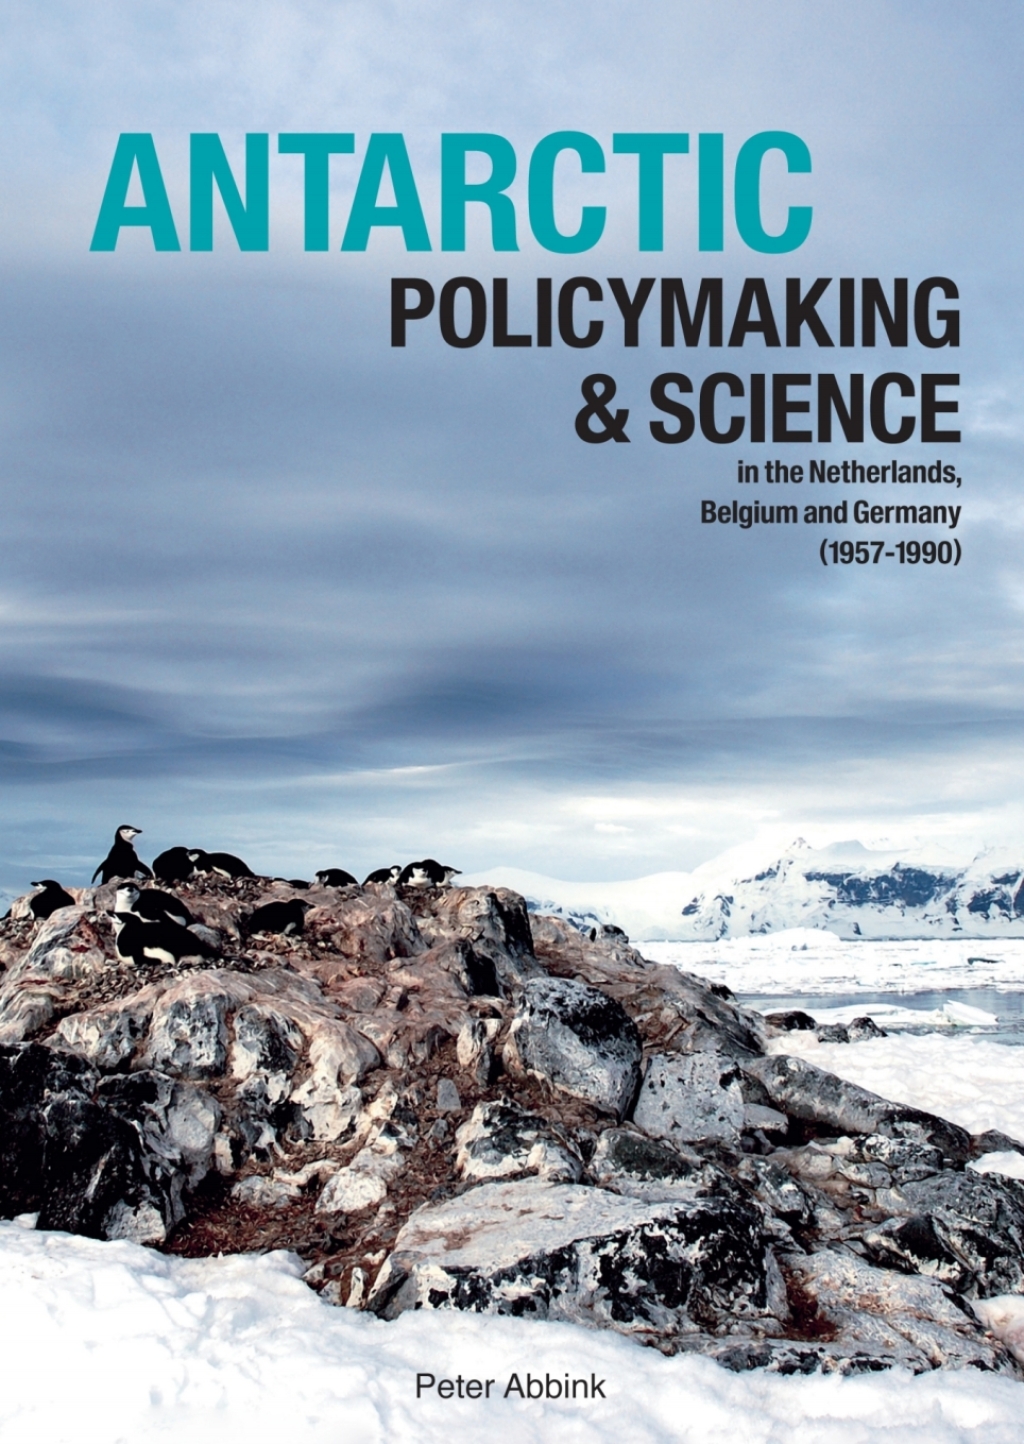 Antarctic Policymaking and Science in the Netherlands  Belgium  and Germany (1957-1990) (eBook) - Peter Abbink,